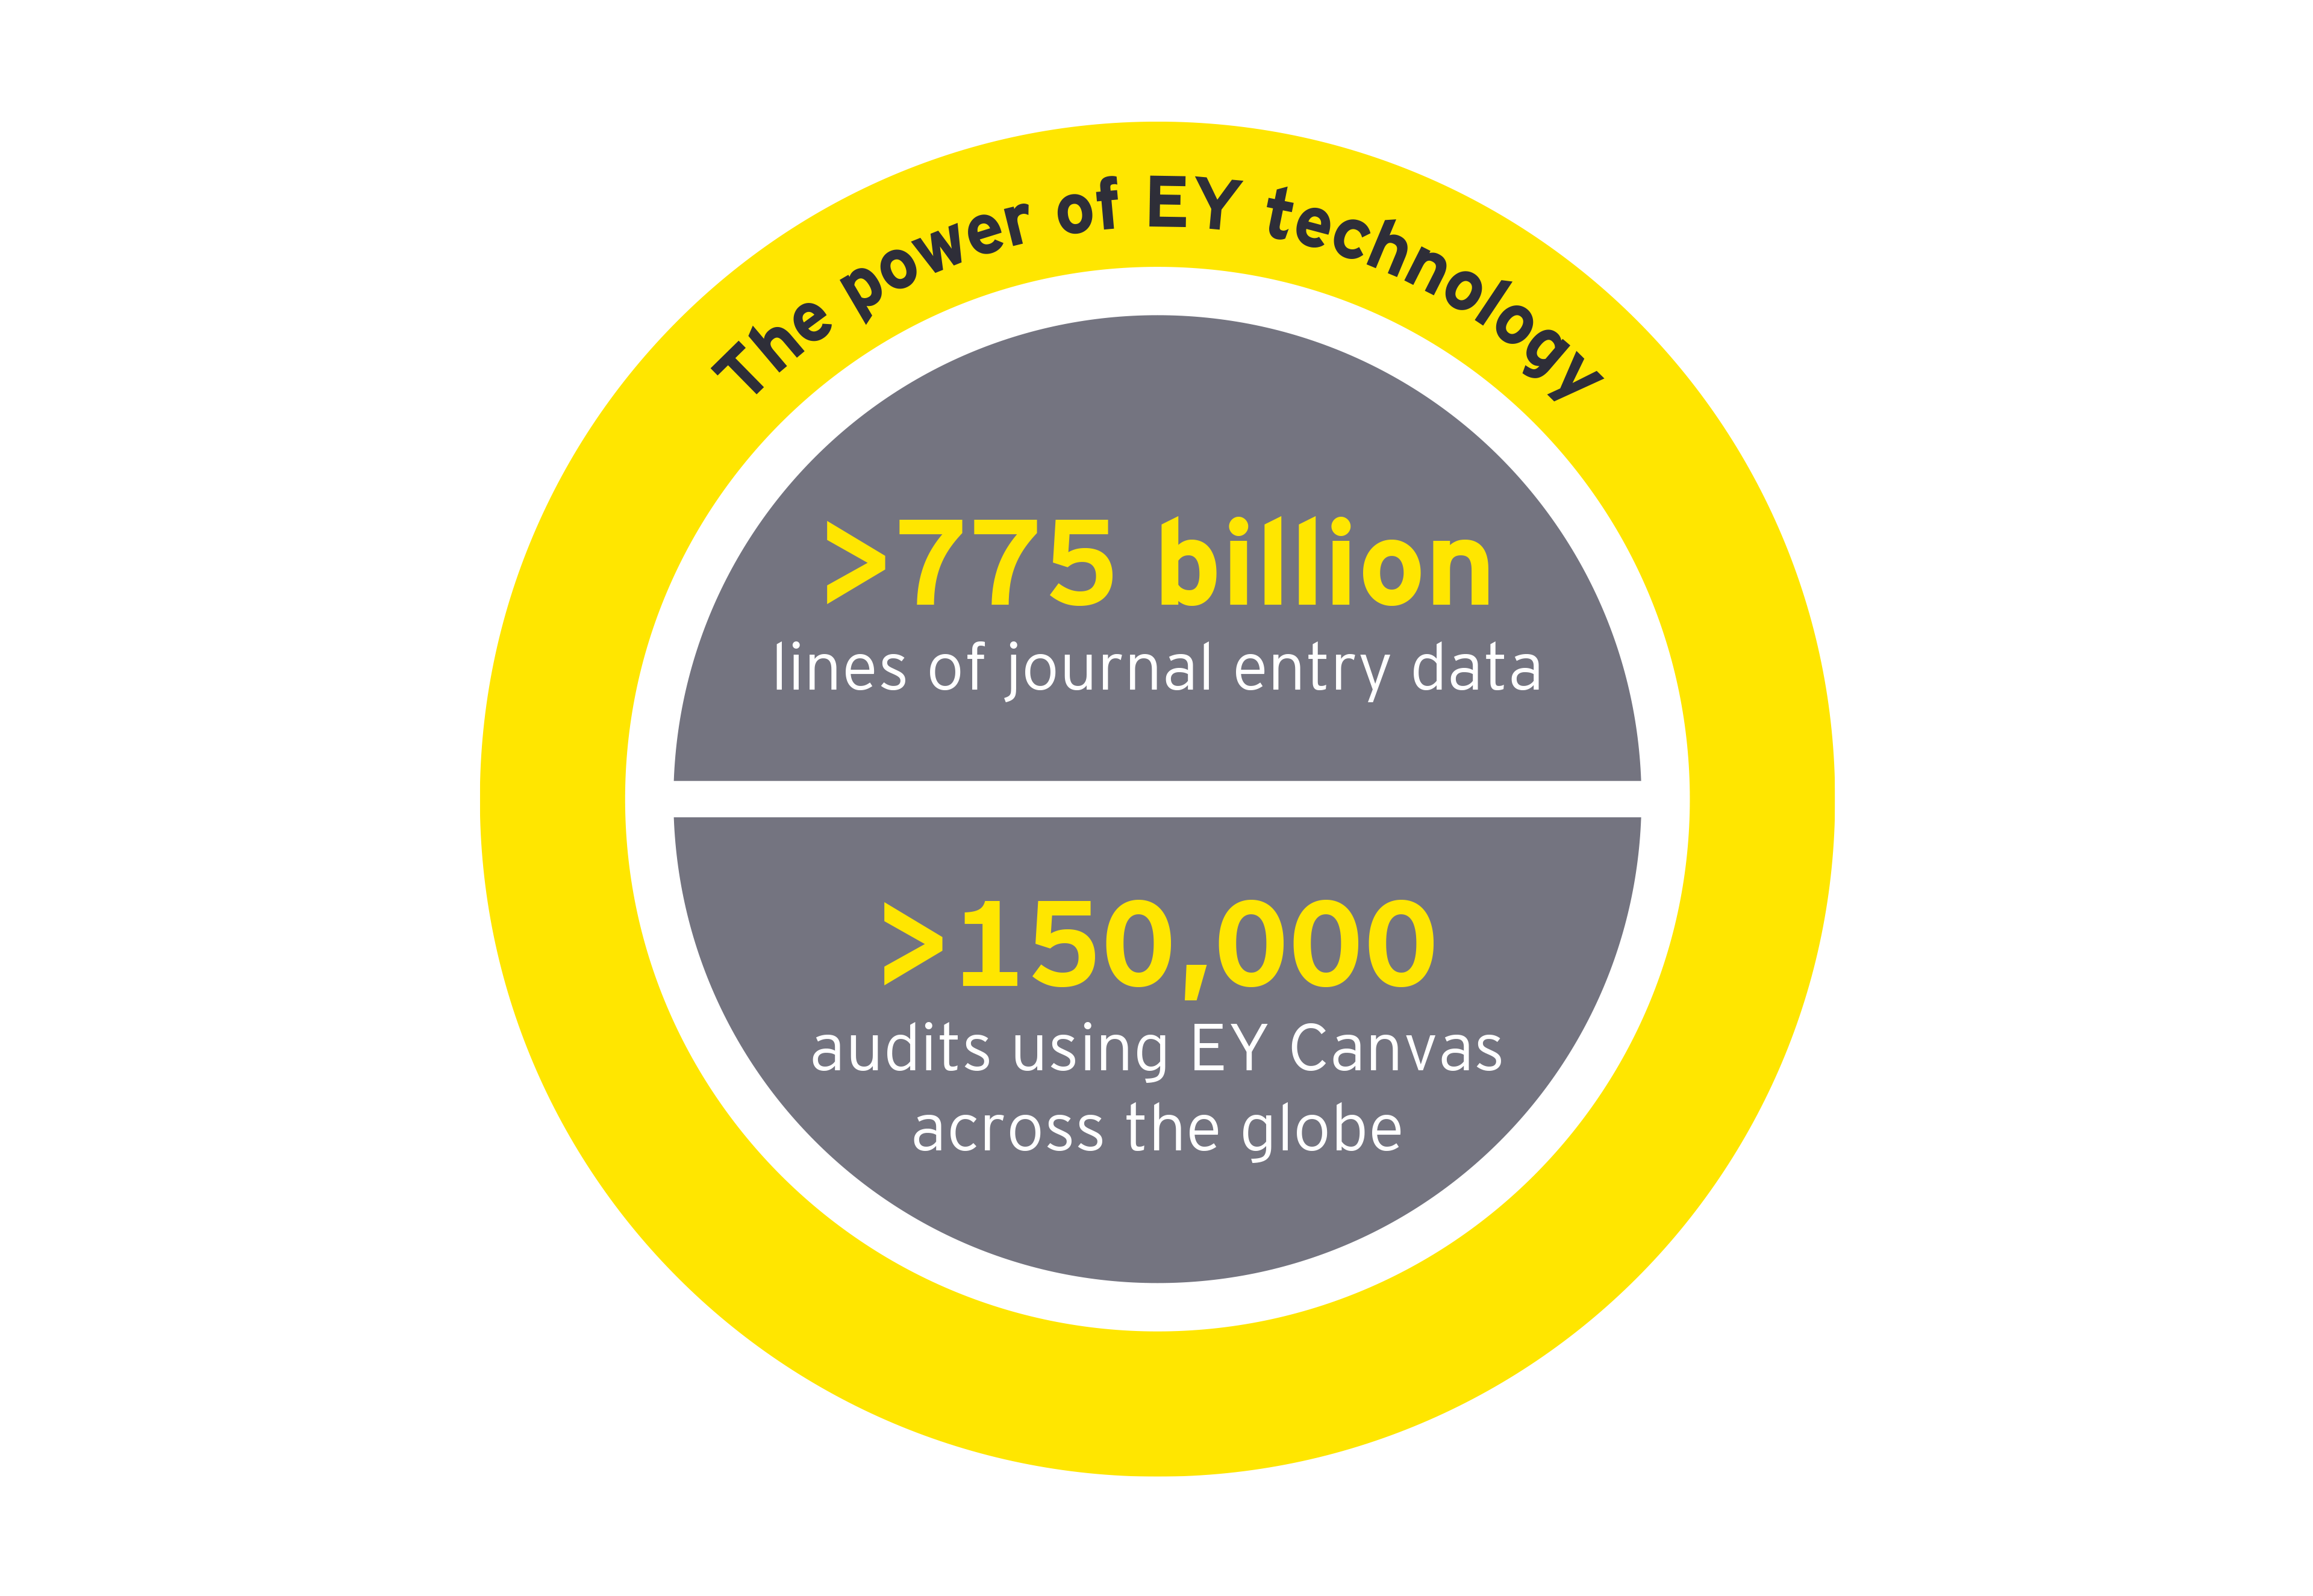 The power of ey technology graphic